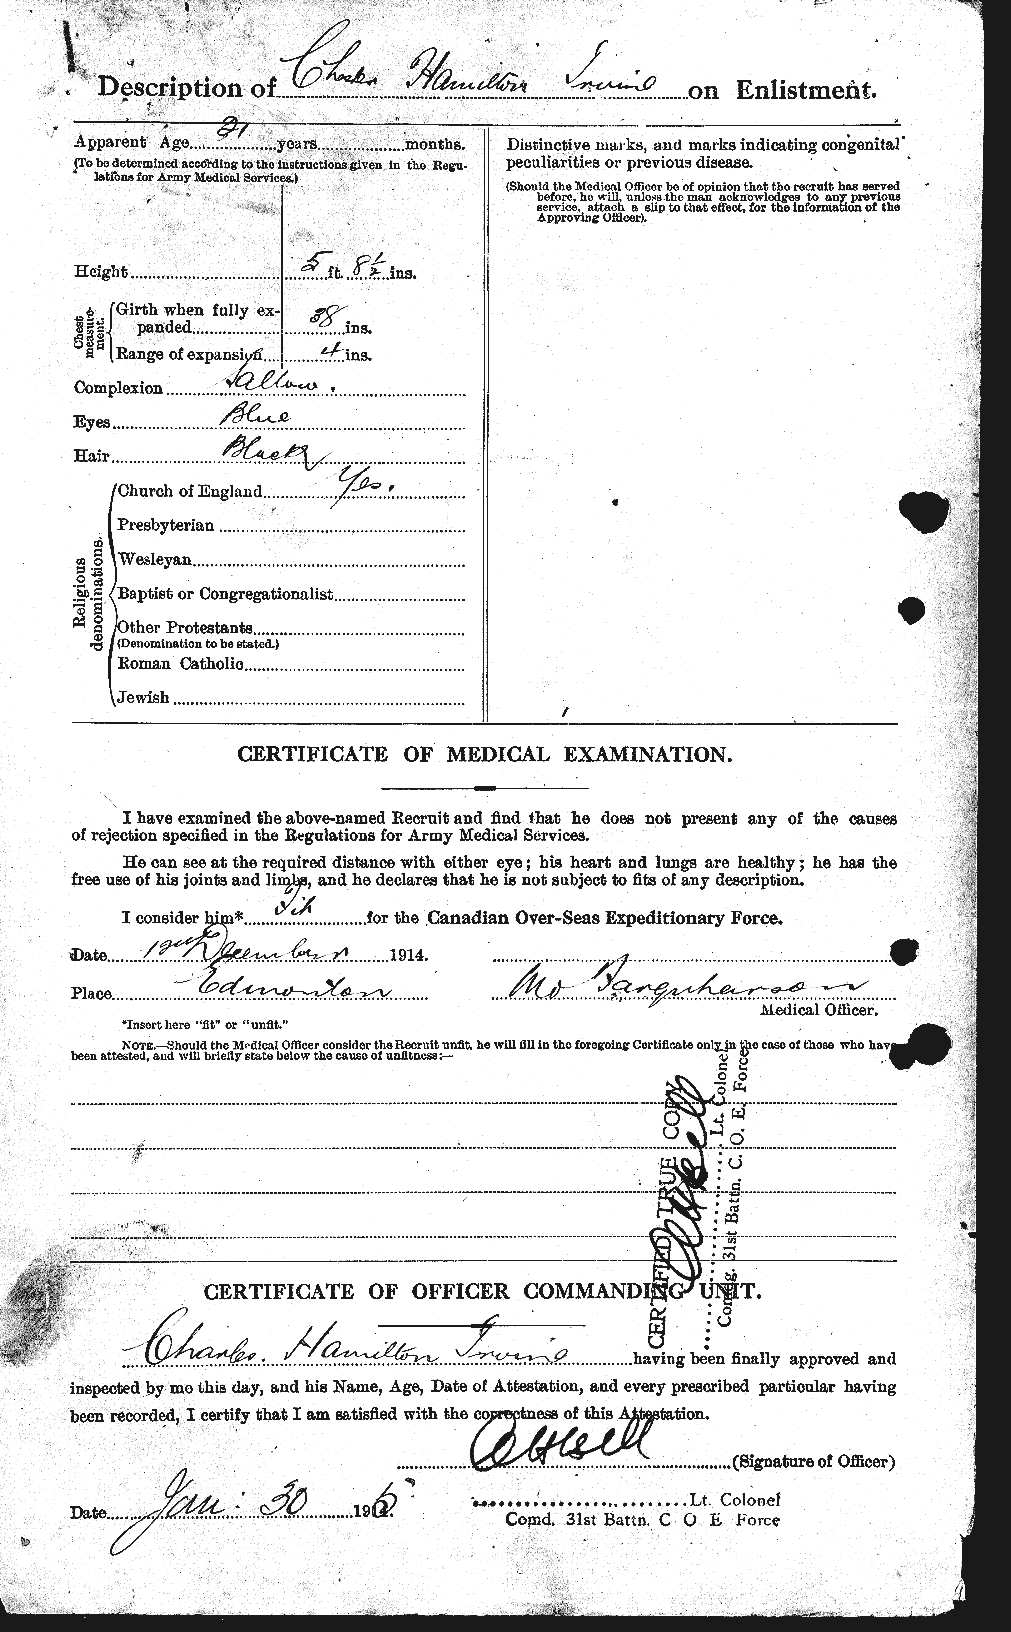 Personnel Records of the First World War - CEF 410419b